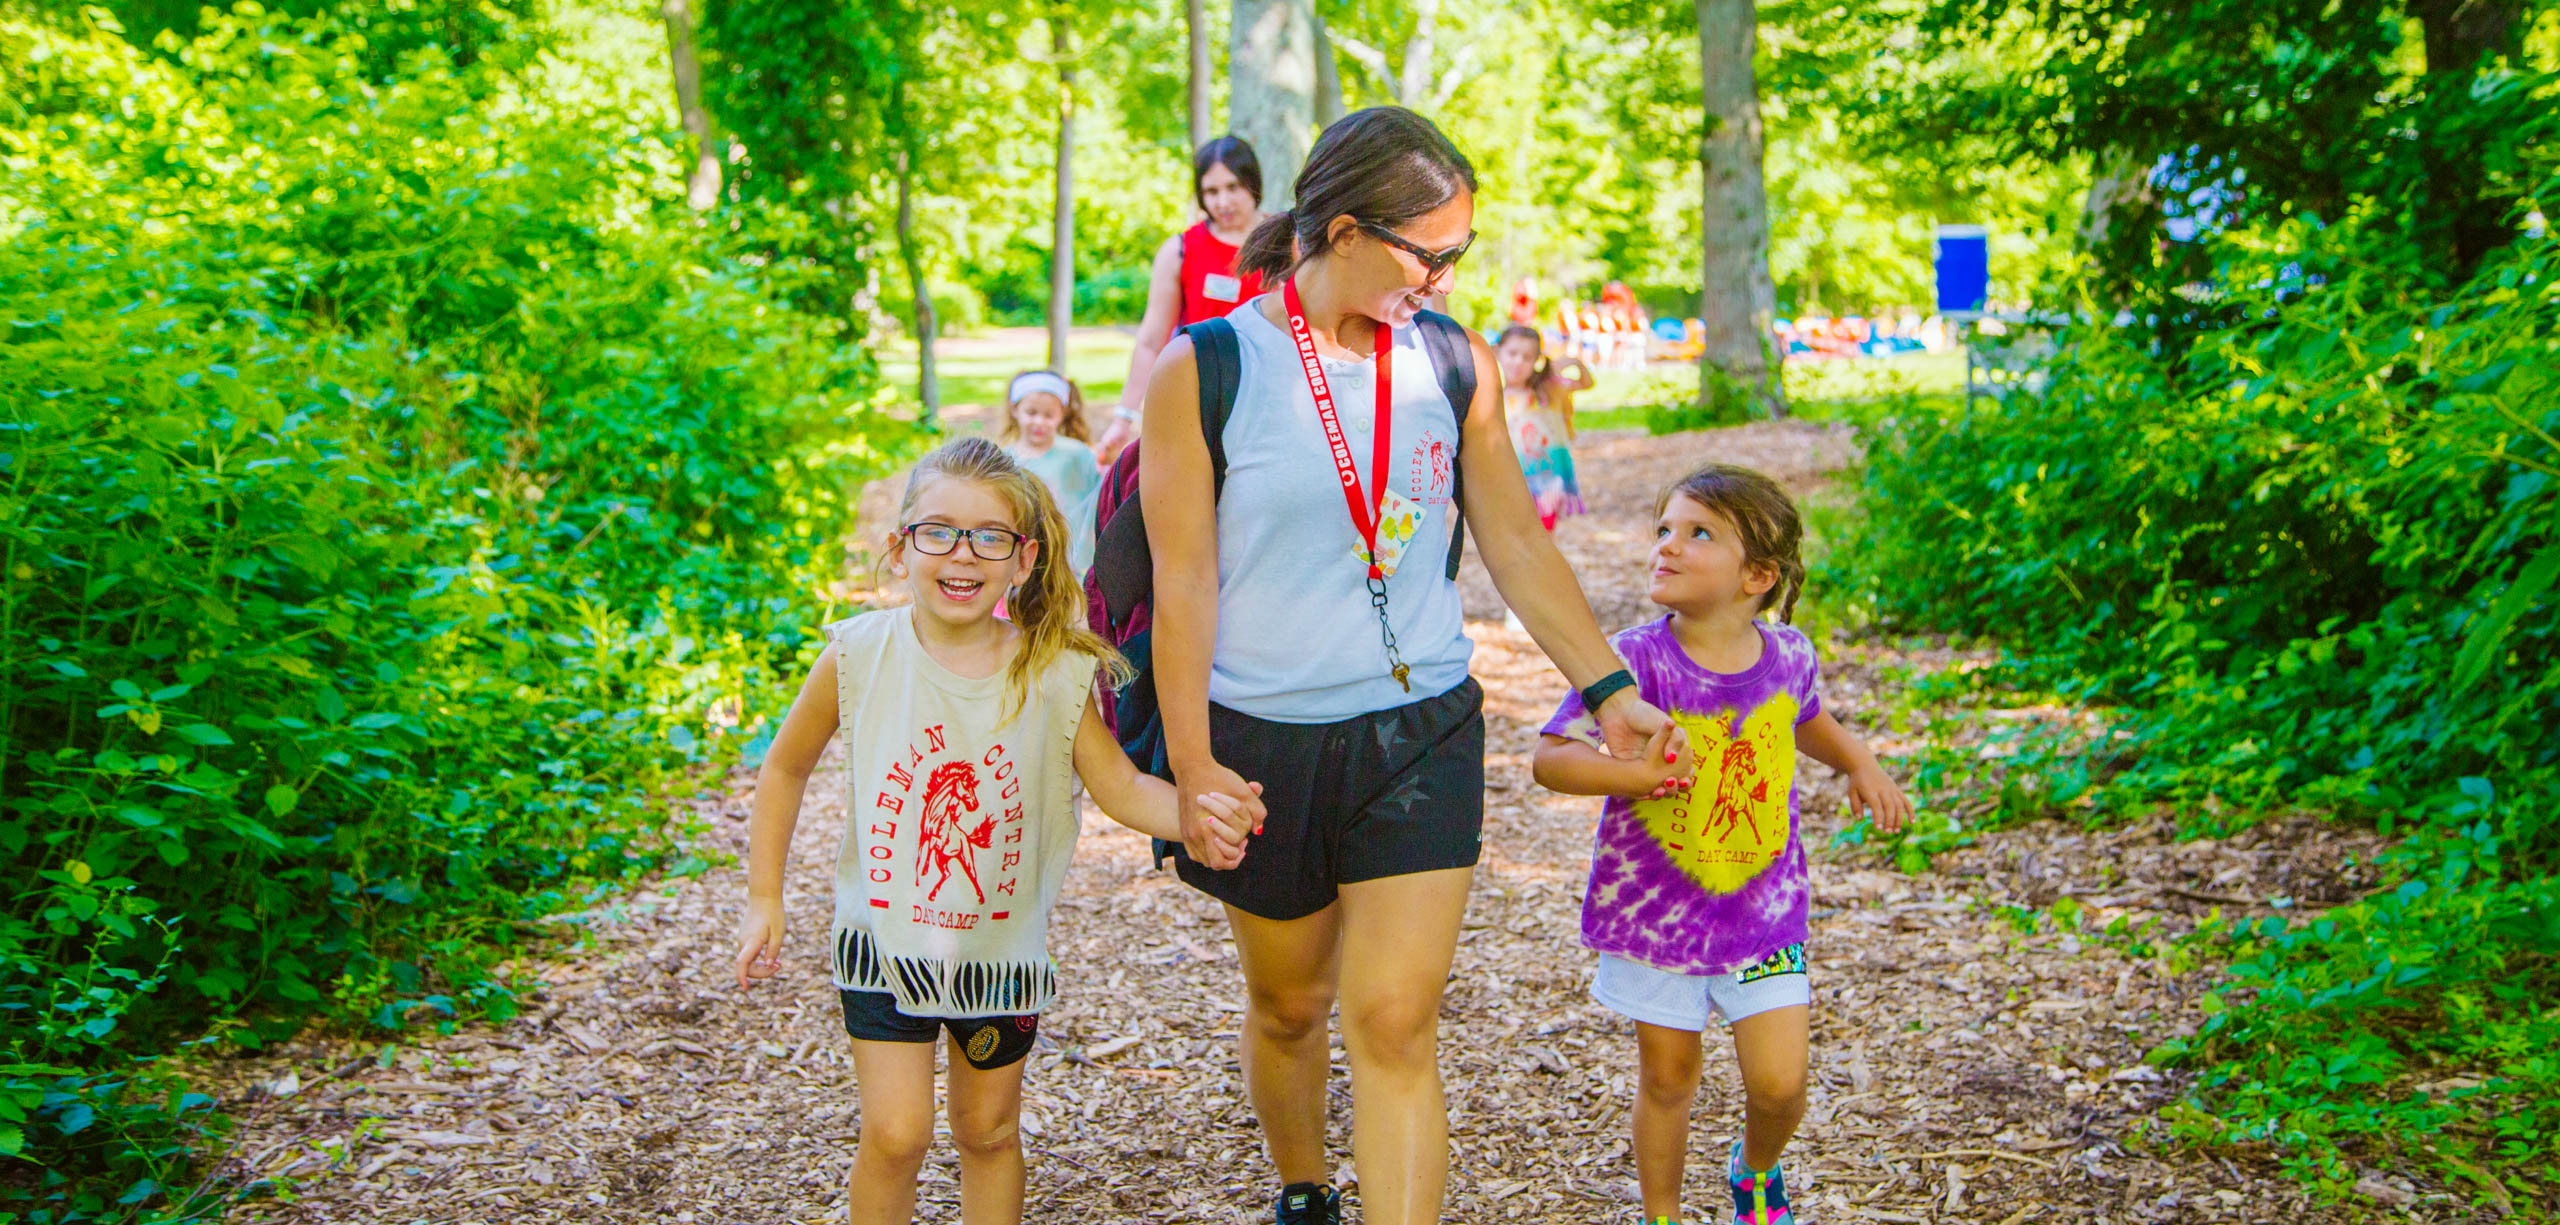 Counselor walking hand in hand with two campers.